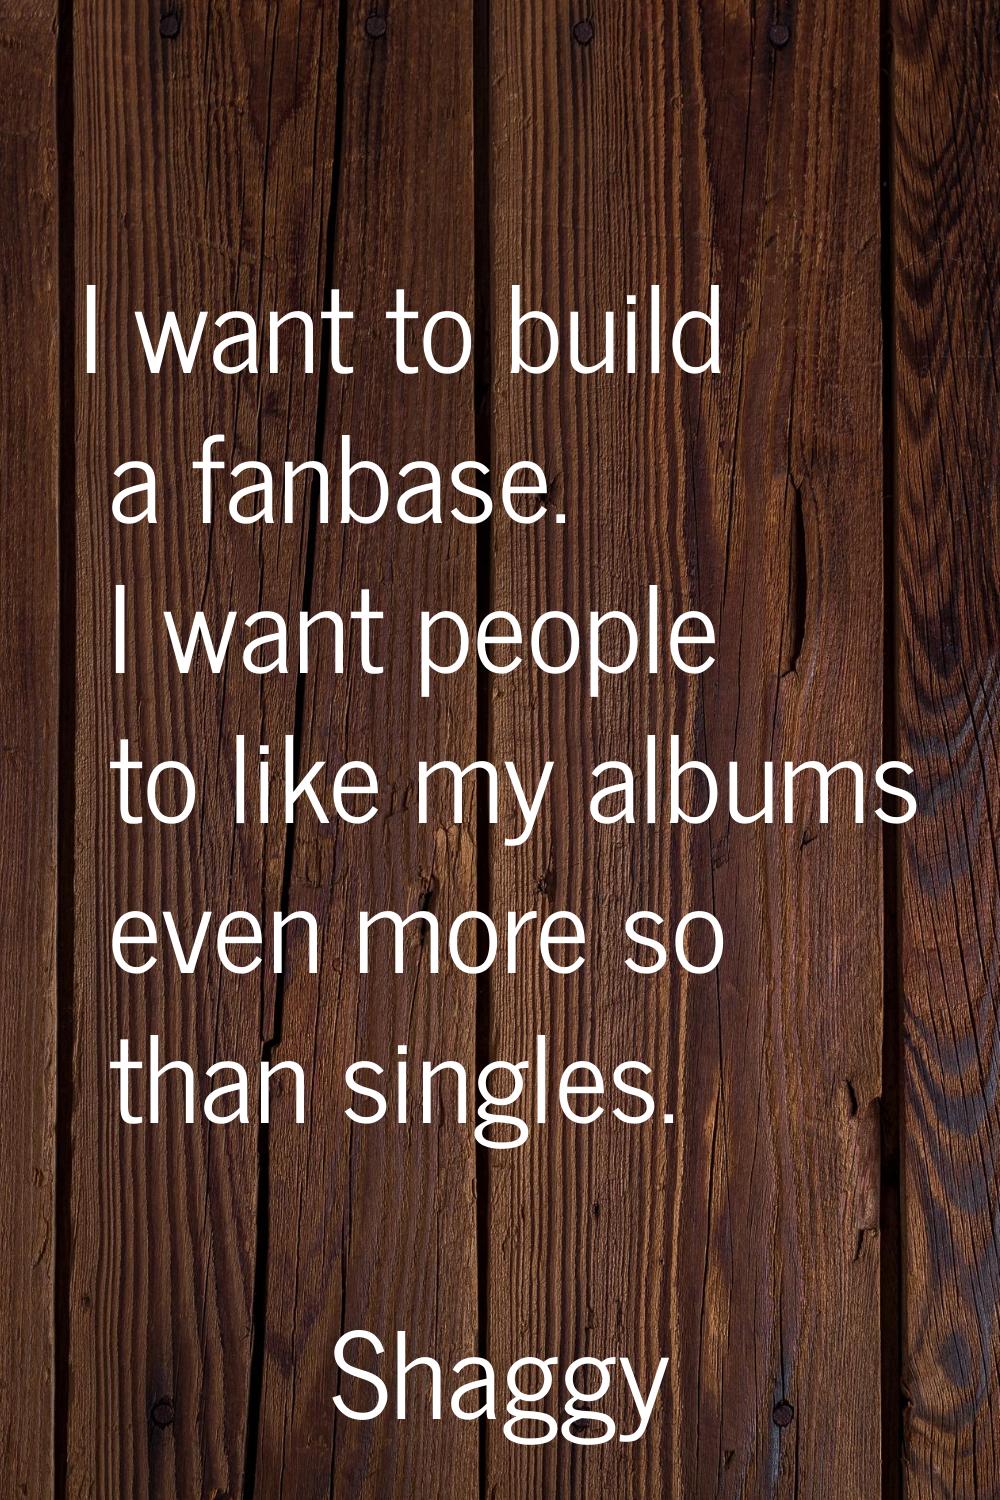 I want to build a fanbase. I want people to like my albums even more so than singles.